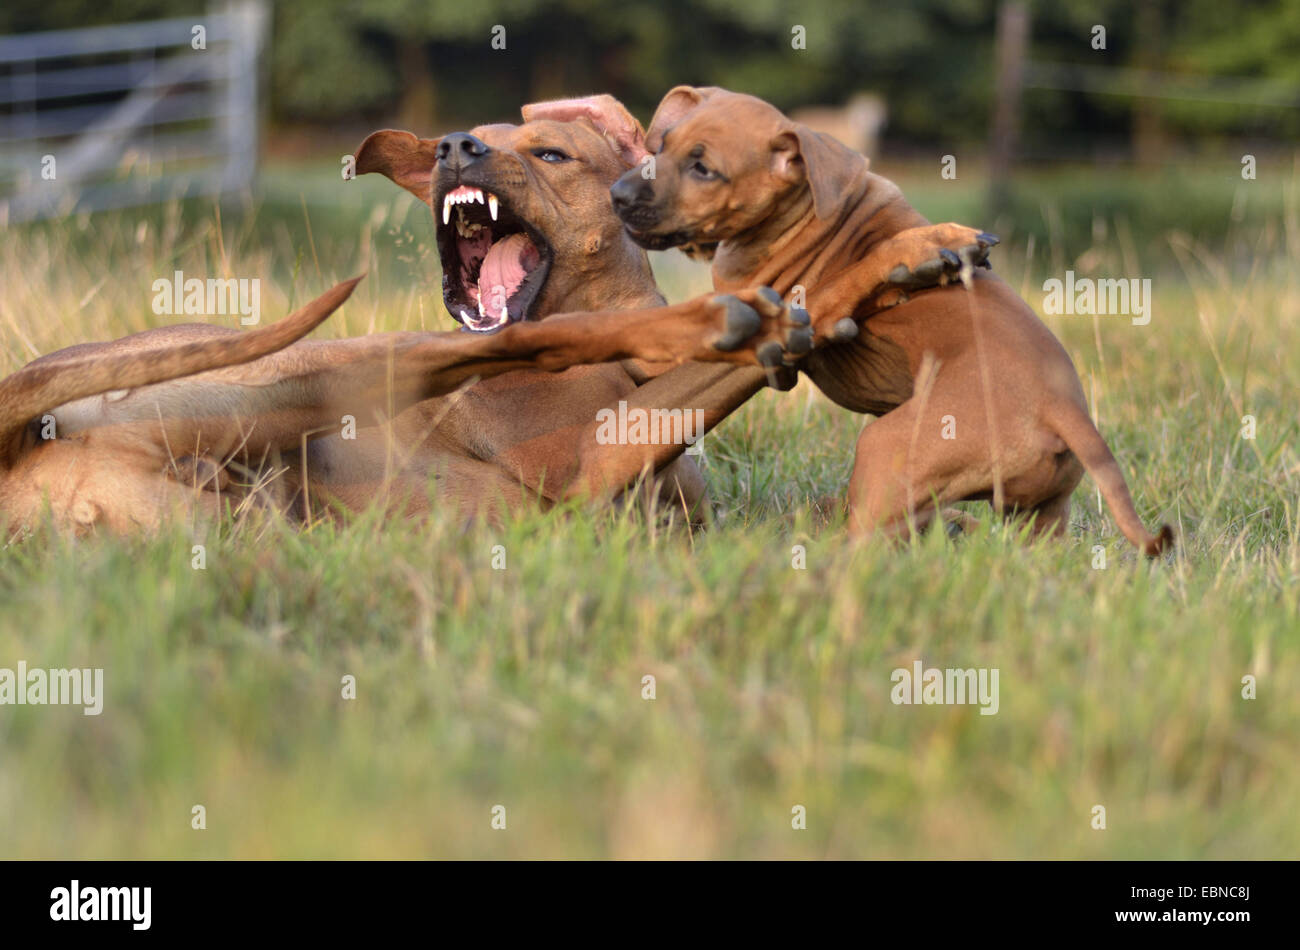 Rhodesian Ridgeback (Canis lupus f. familiaris), puppy romping with a male dog, Germany, North Rhine-Westphalia Stock Photo